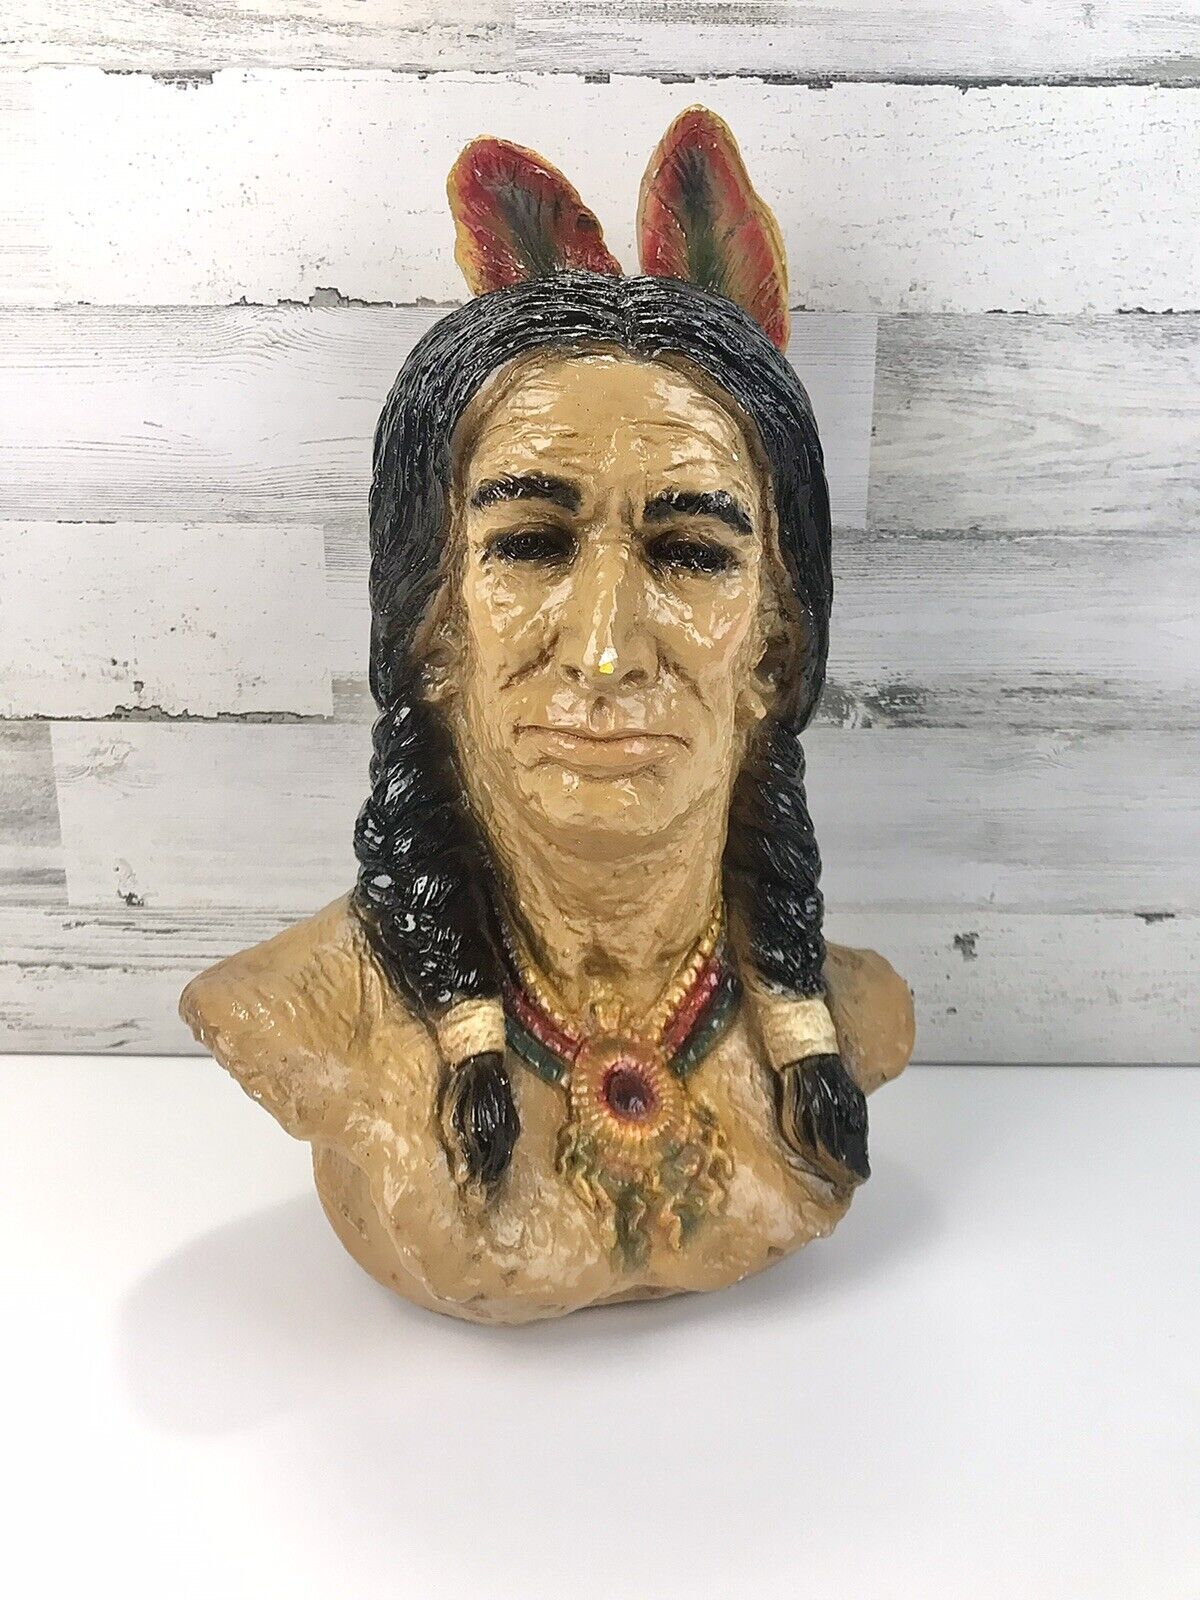 LARGE CERAMIC INDIAN CHIEF BUST HEAD STATUE HAND PAINTED - 19”